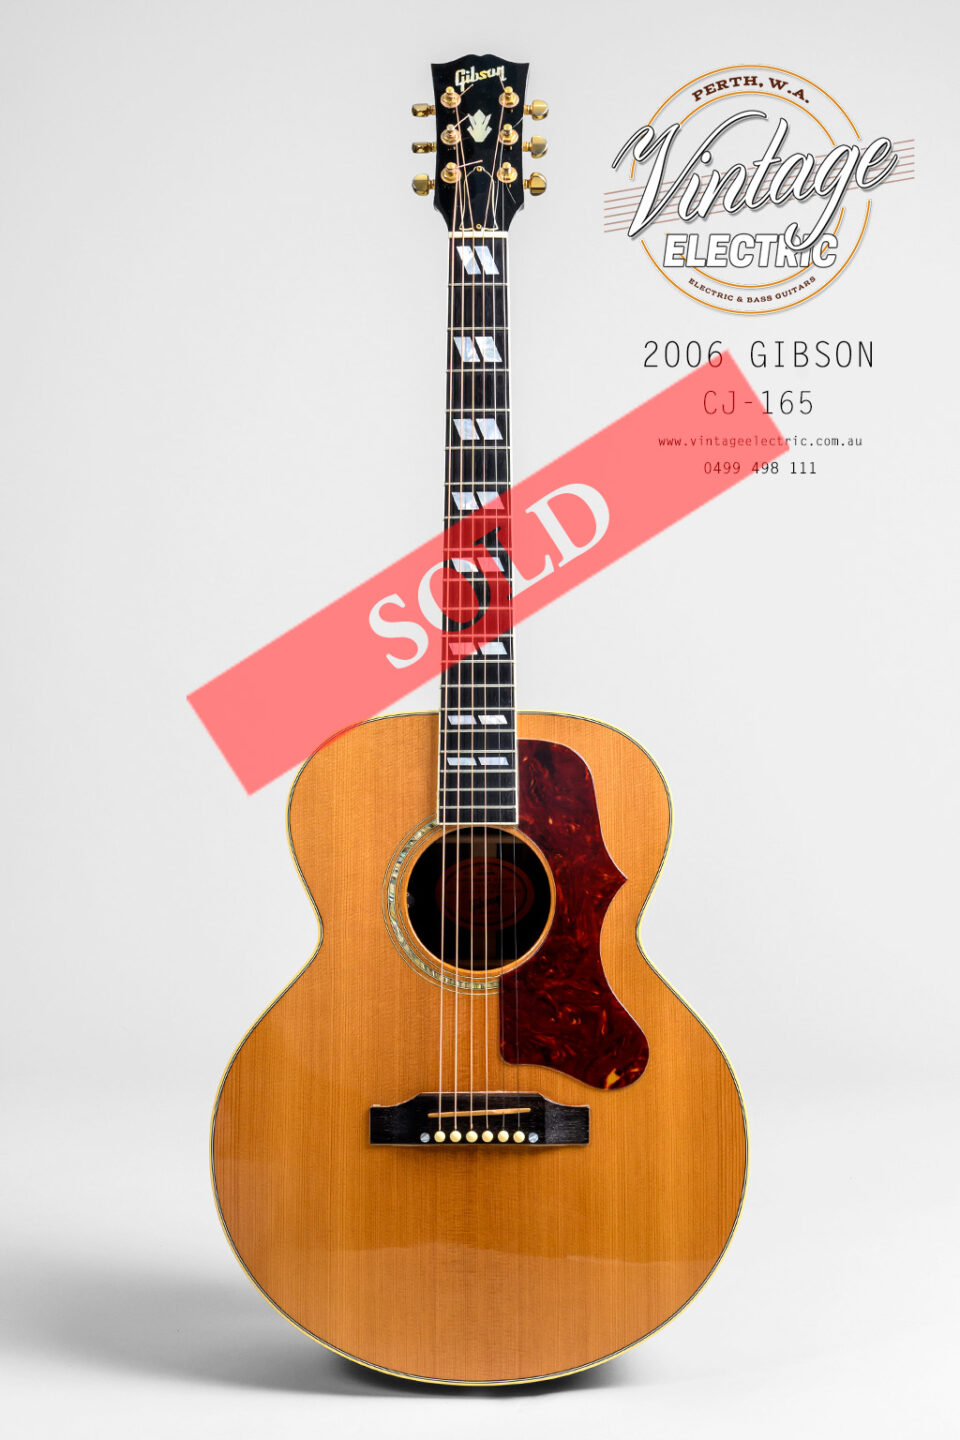 2006 Gibson CJ 165 LARGE SOLD